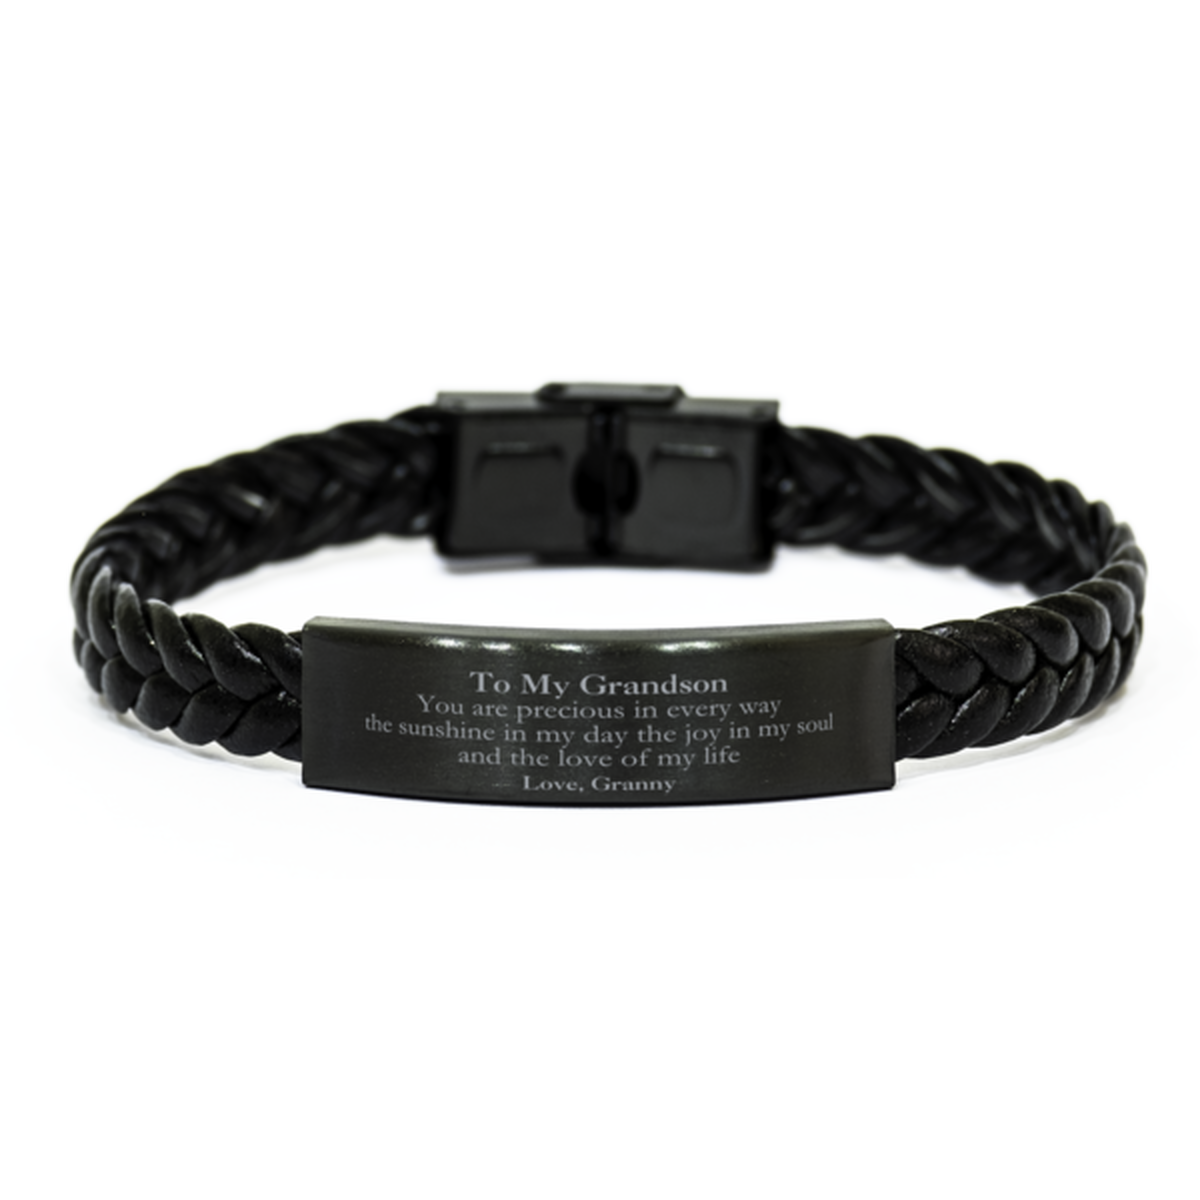 Graduation Gifts for Grandson Braided Leather Bracelet Present from Granny, Christmas Grandson Birthday Gifts Grandson You are precious in every way the sunshine in my day. Love, Granny